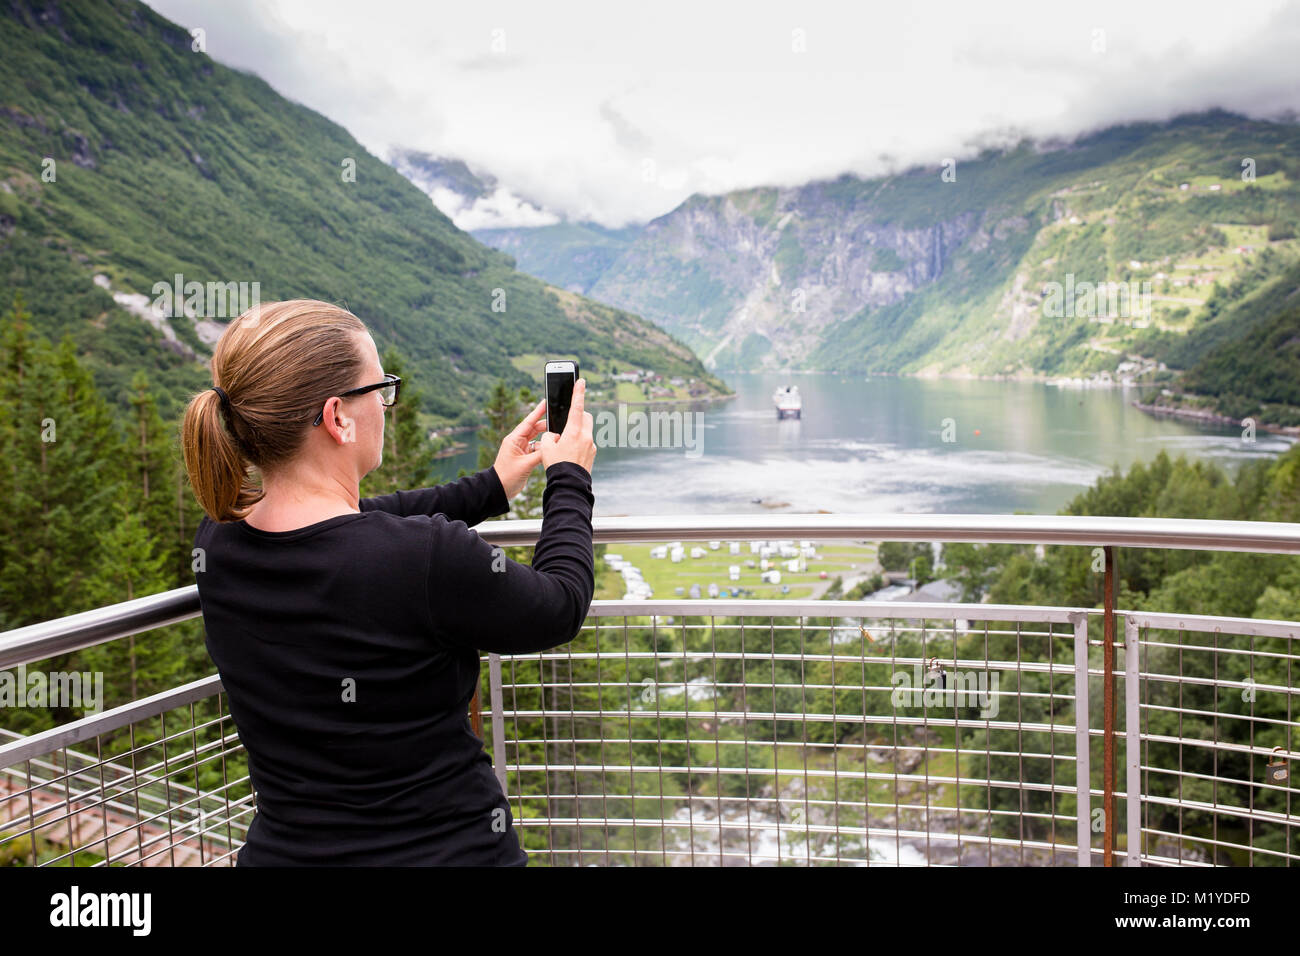 Woman taking a picture with her smartphone in front of a majestic view of a fjord in Norway. Stock Photo